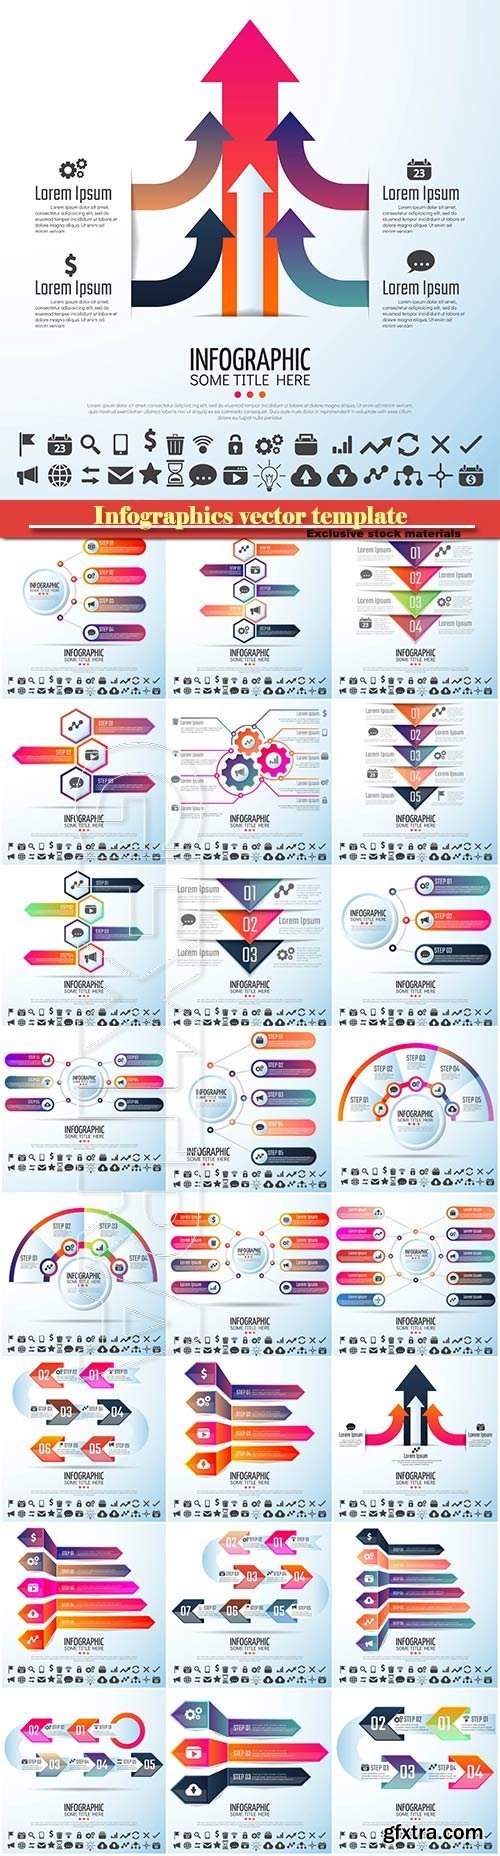 Infographics vector template for business presentations or information banner